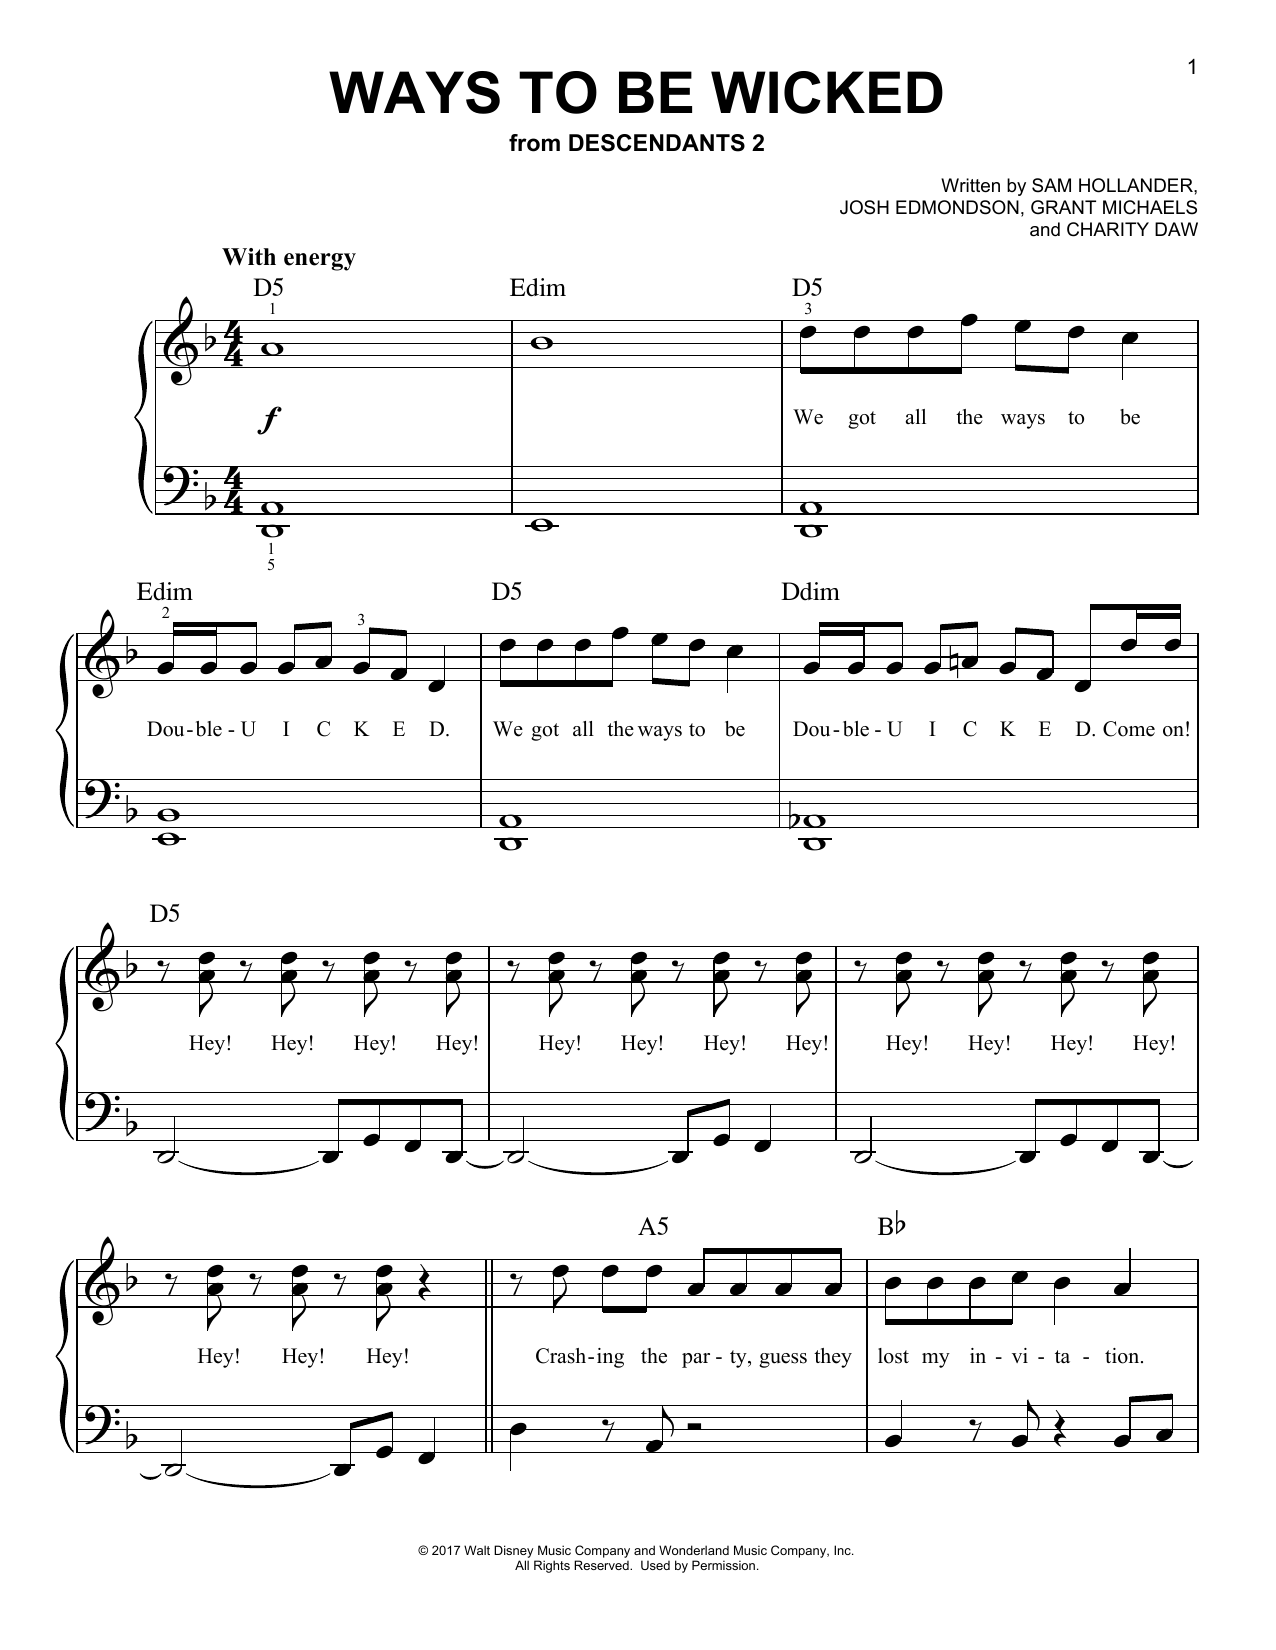 Download Dove Cameron, Cameron Boyce, Booboo Ways to Be Wicked (from Disney's Descen Sheet Music